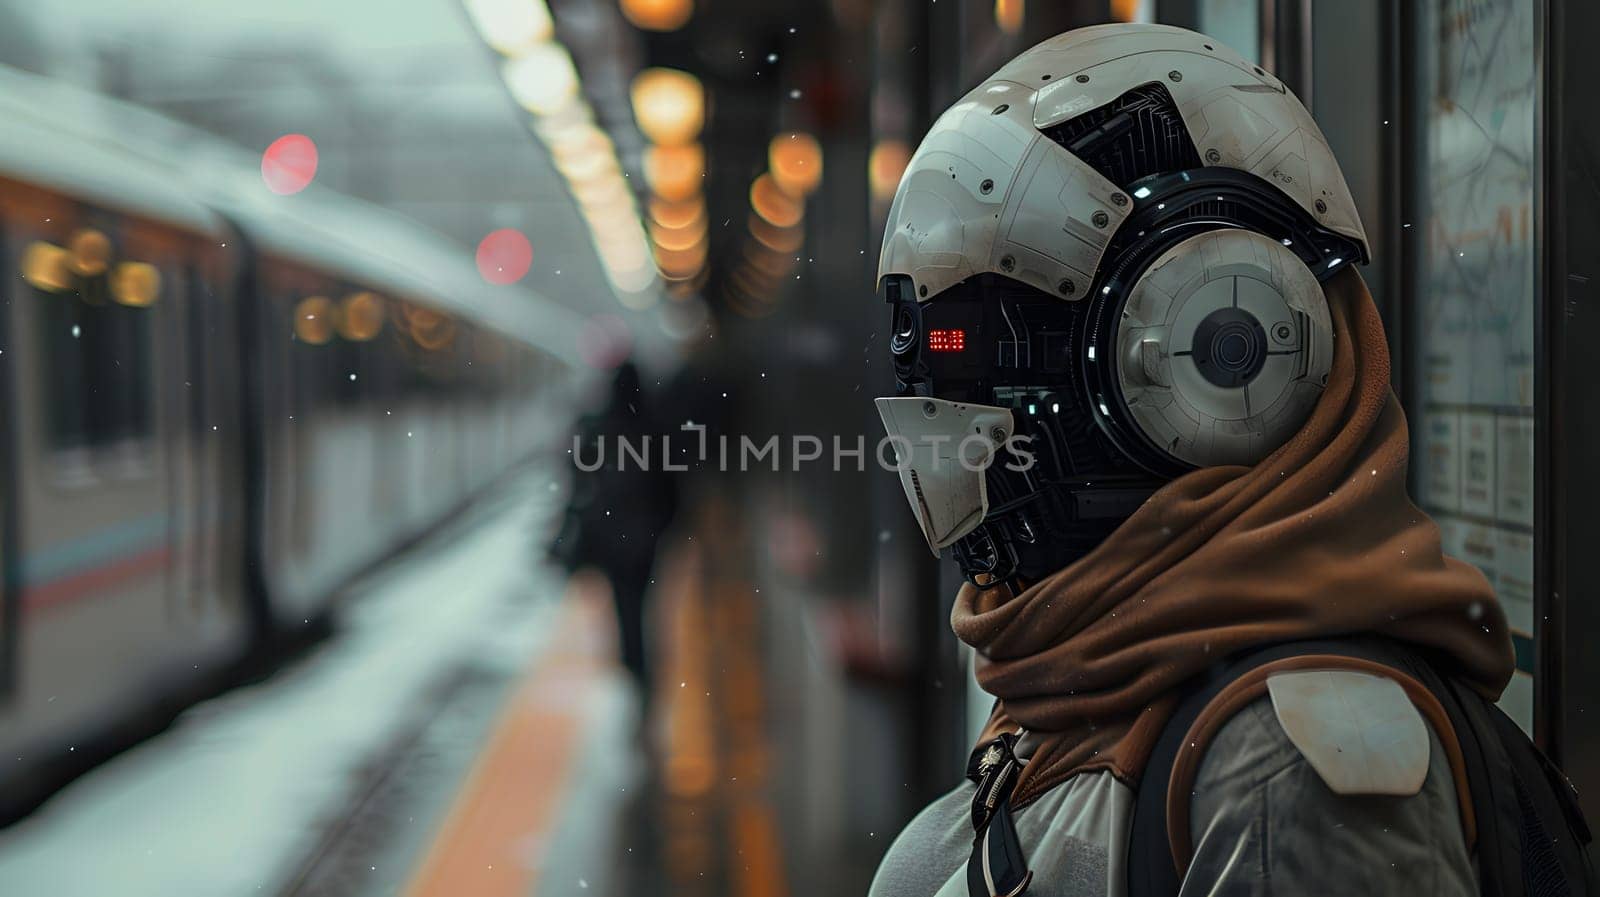 A person in a futuristic helmet and headphones waits for a train at a city station, emphasizing the blend of automotive lighting, personal protective equipment, and public transport travel